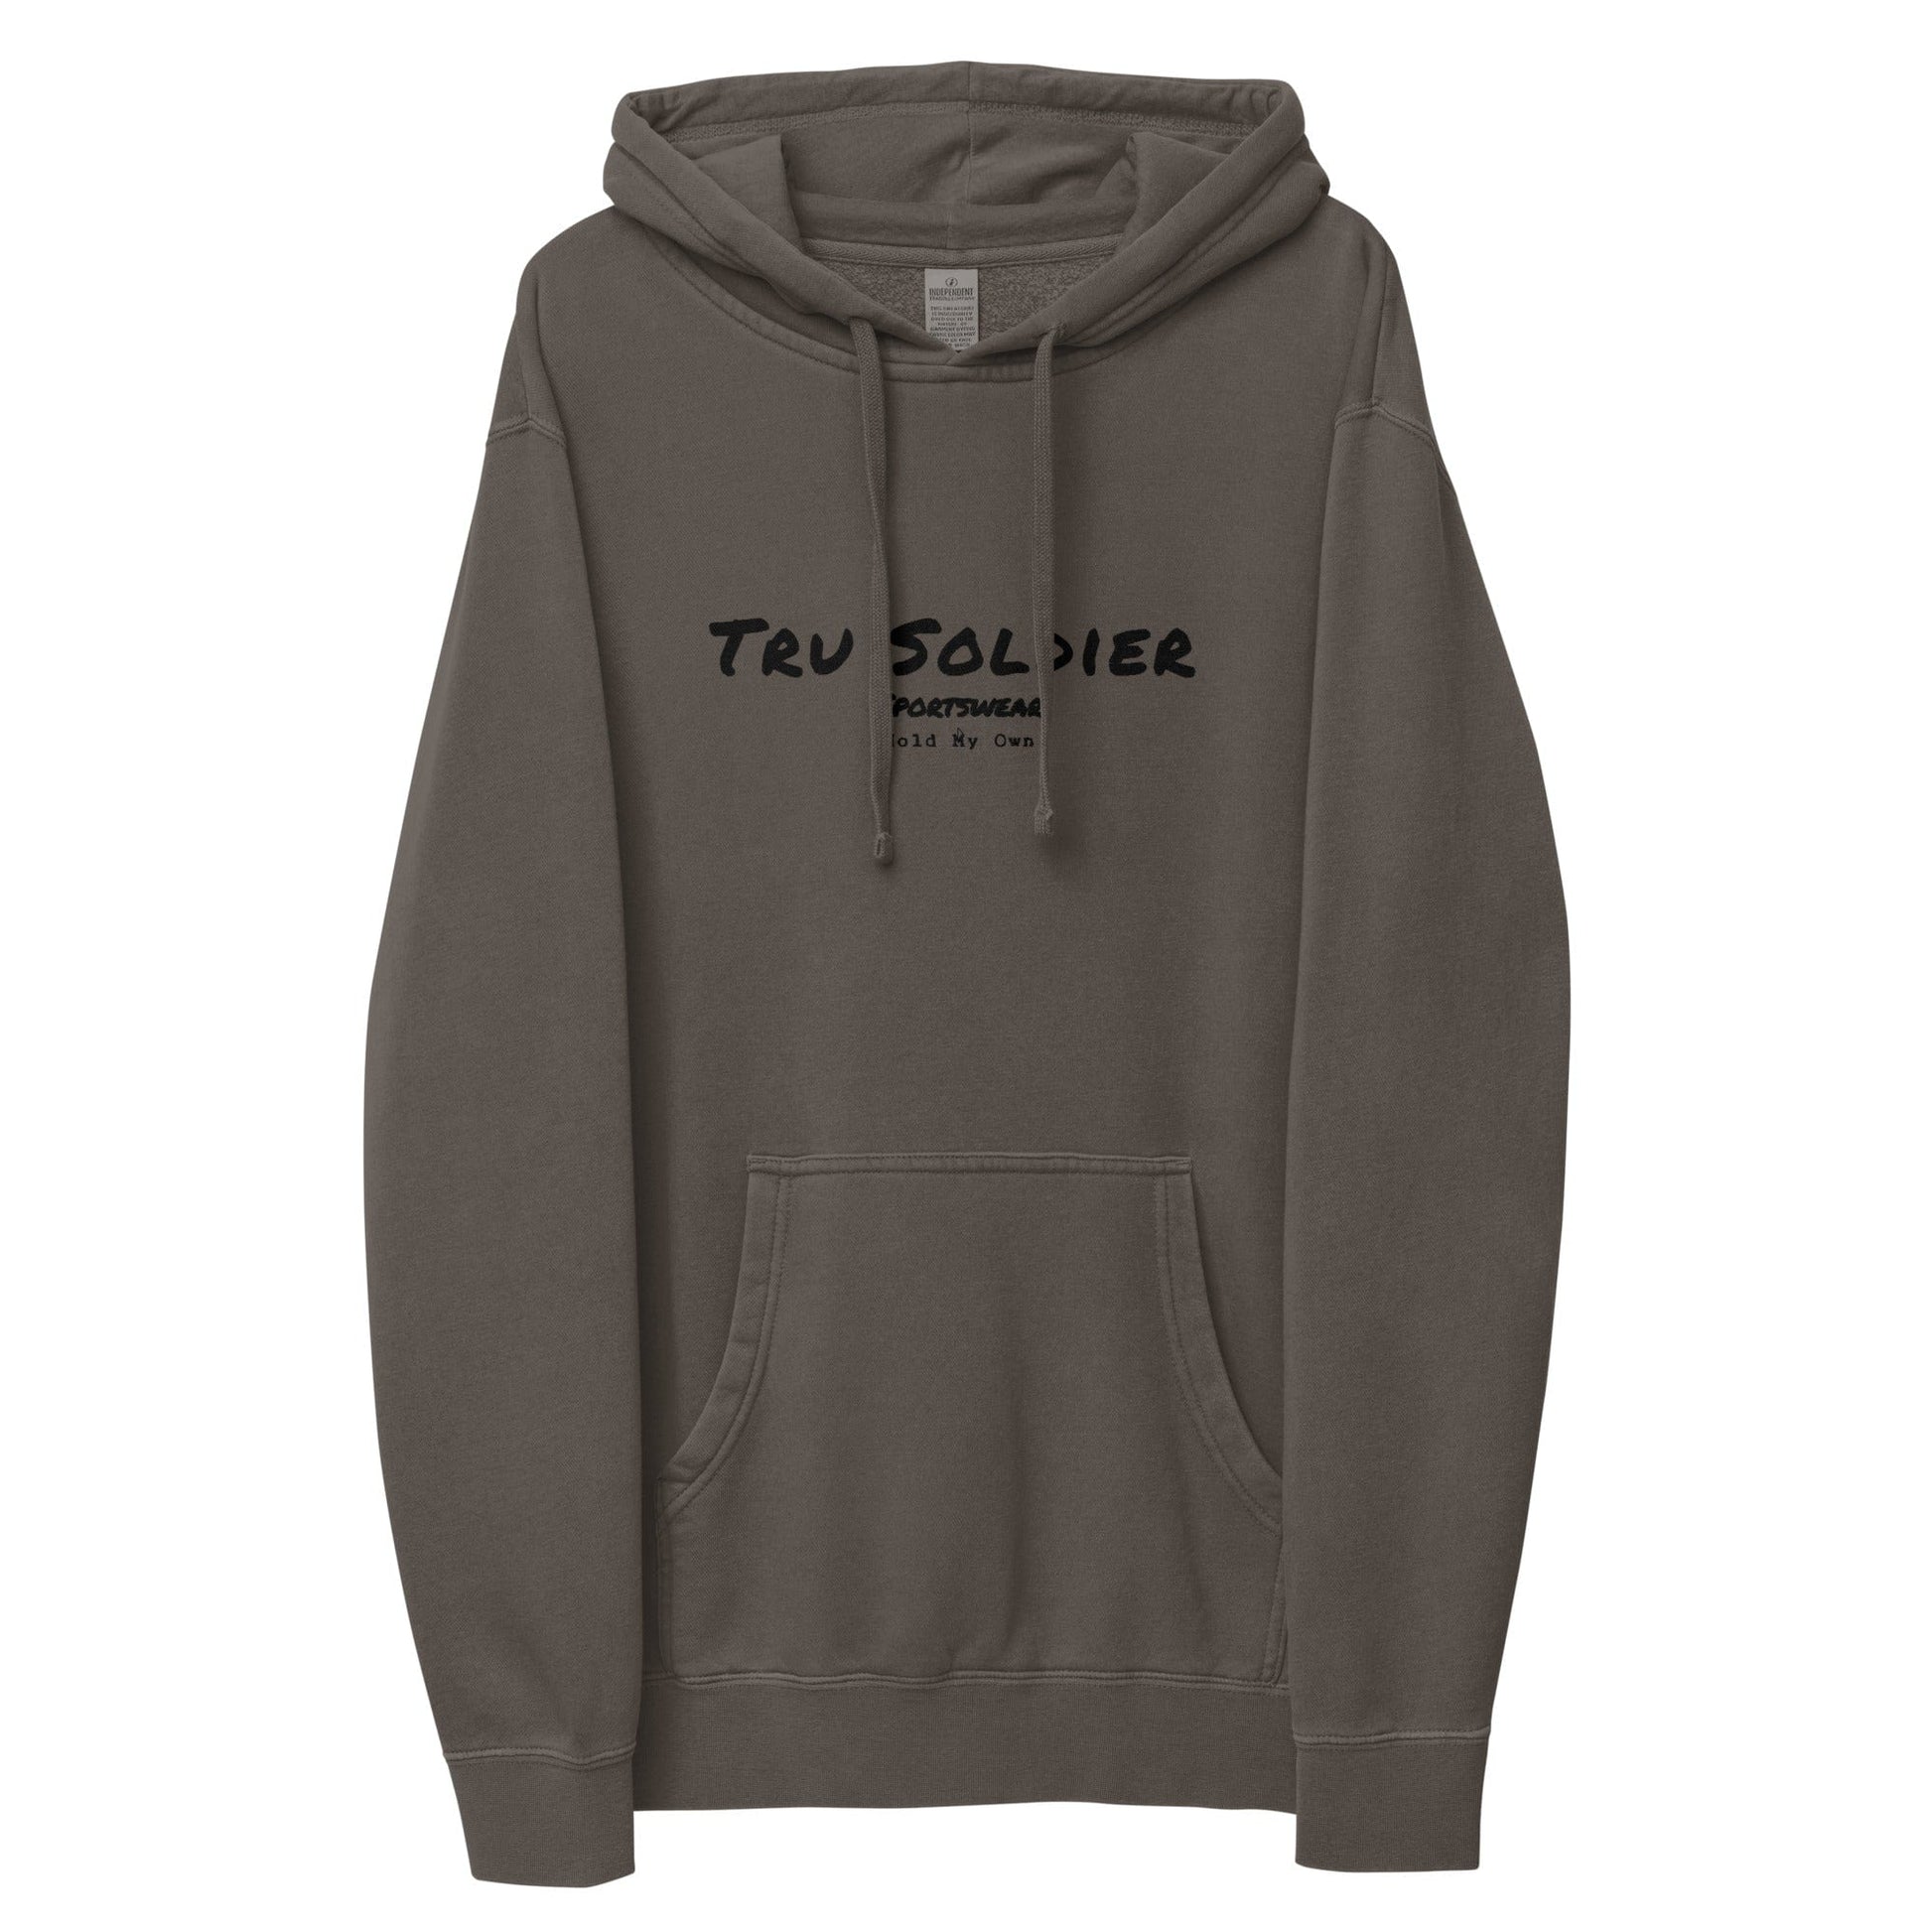 Tru Soldier Sportswear  Pigment Black / S Signature embroidered Unisex pigment-dyed hoodie